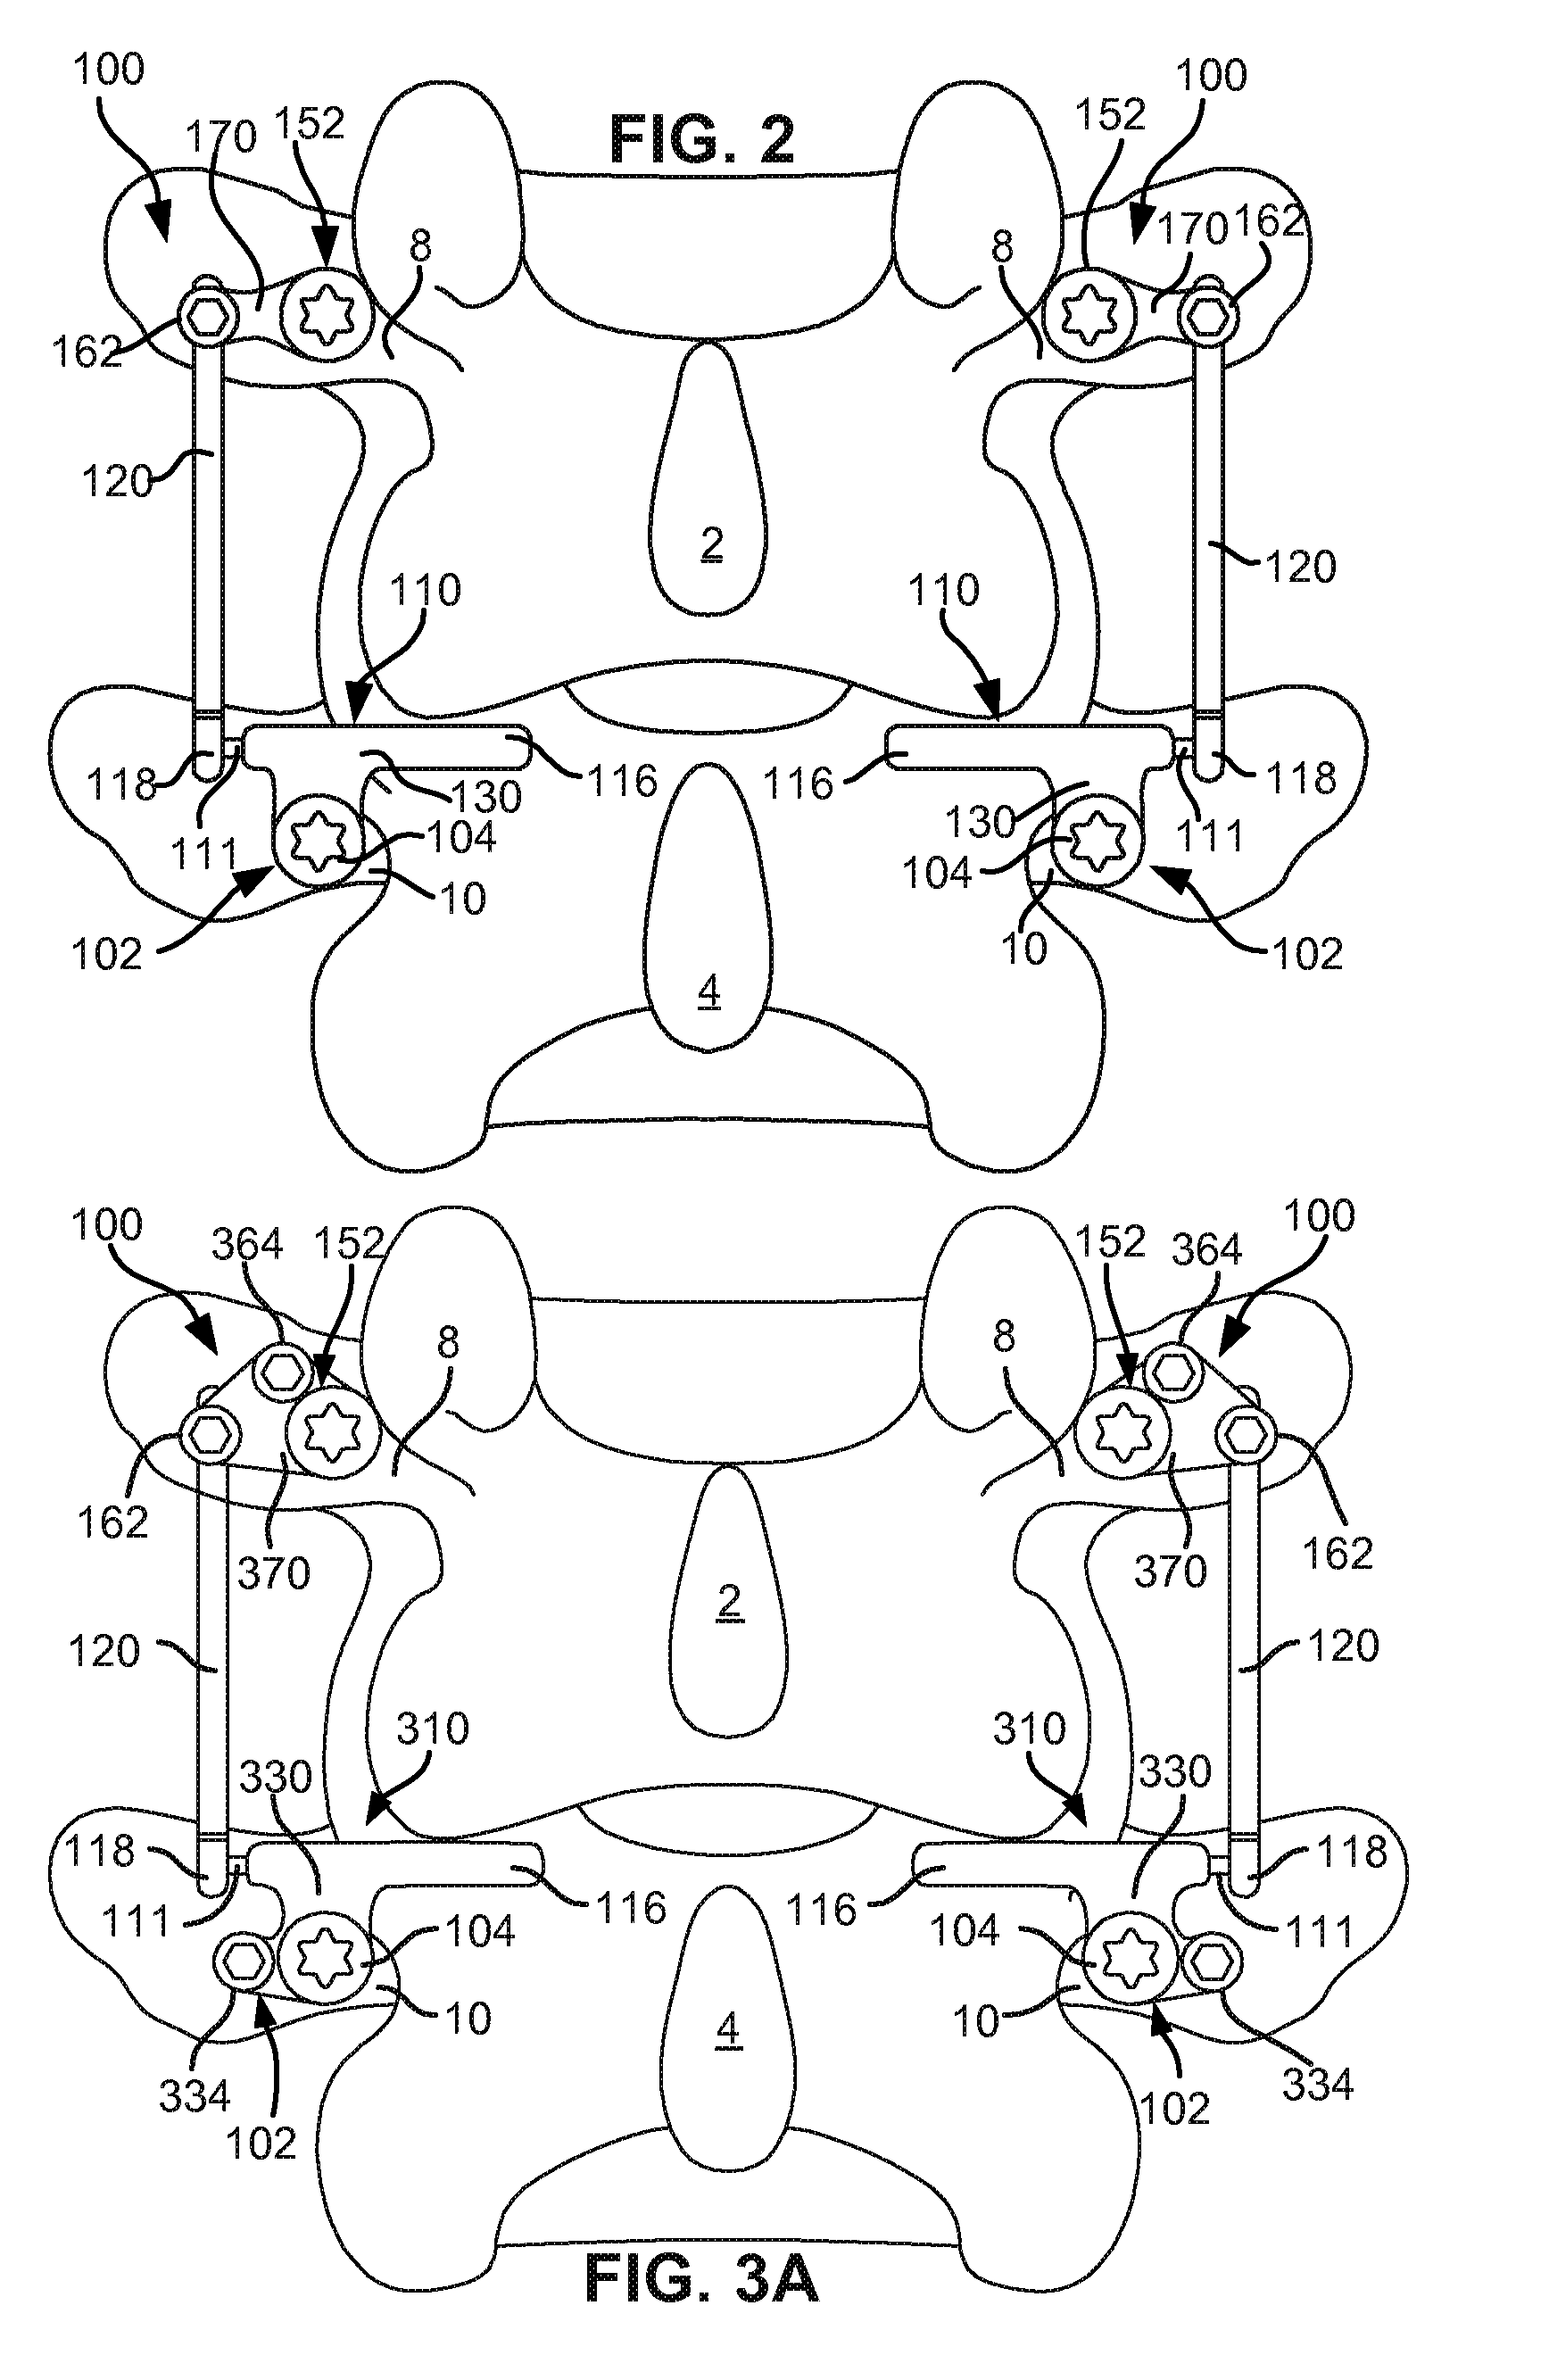 Modular in-line deflection rod and bone anchor system and method for dynamic stabilization of the spine